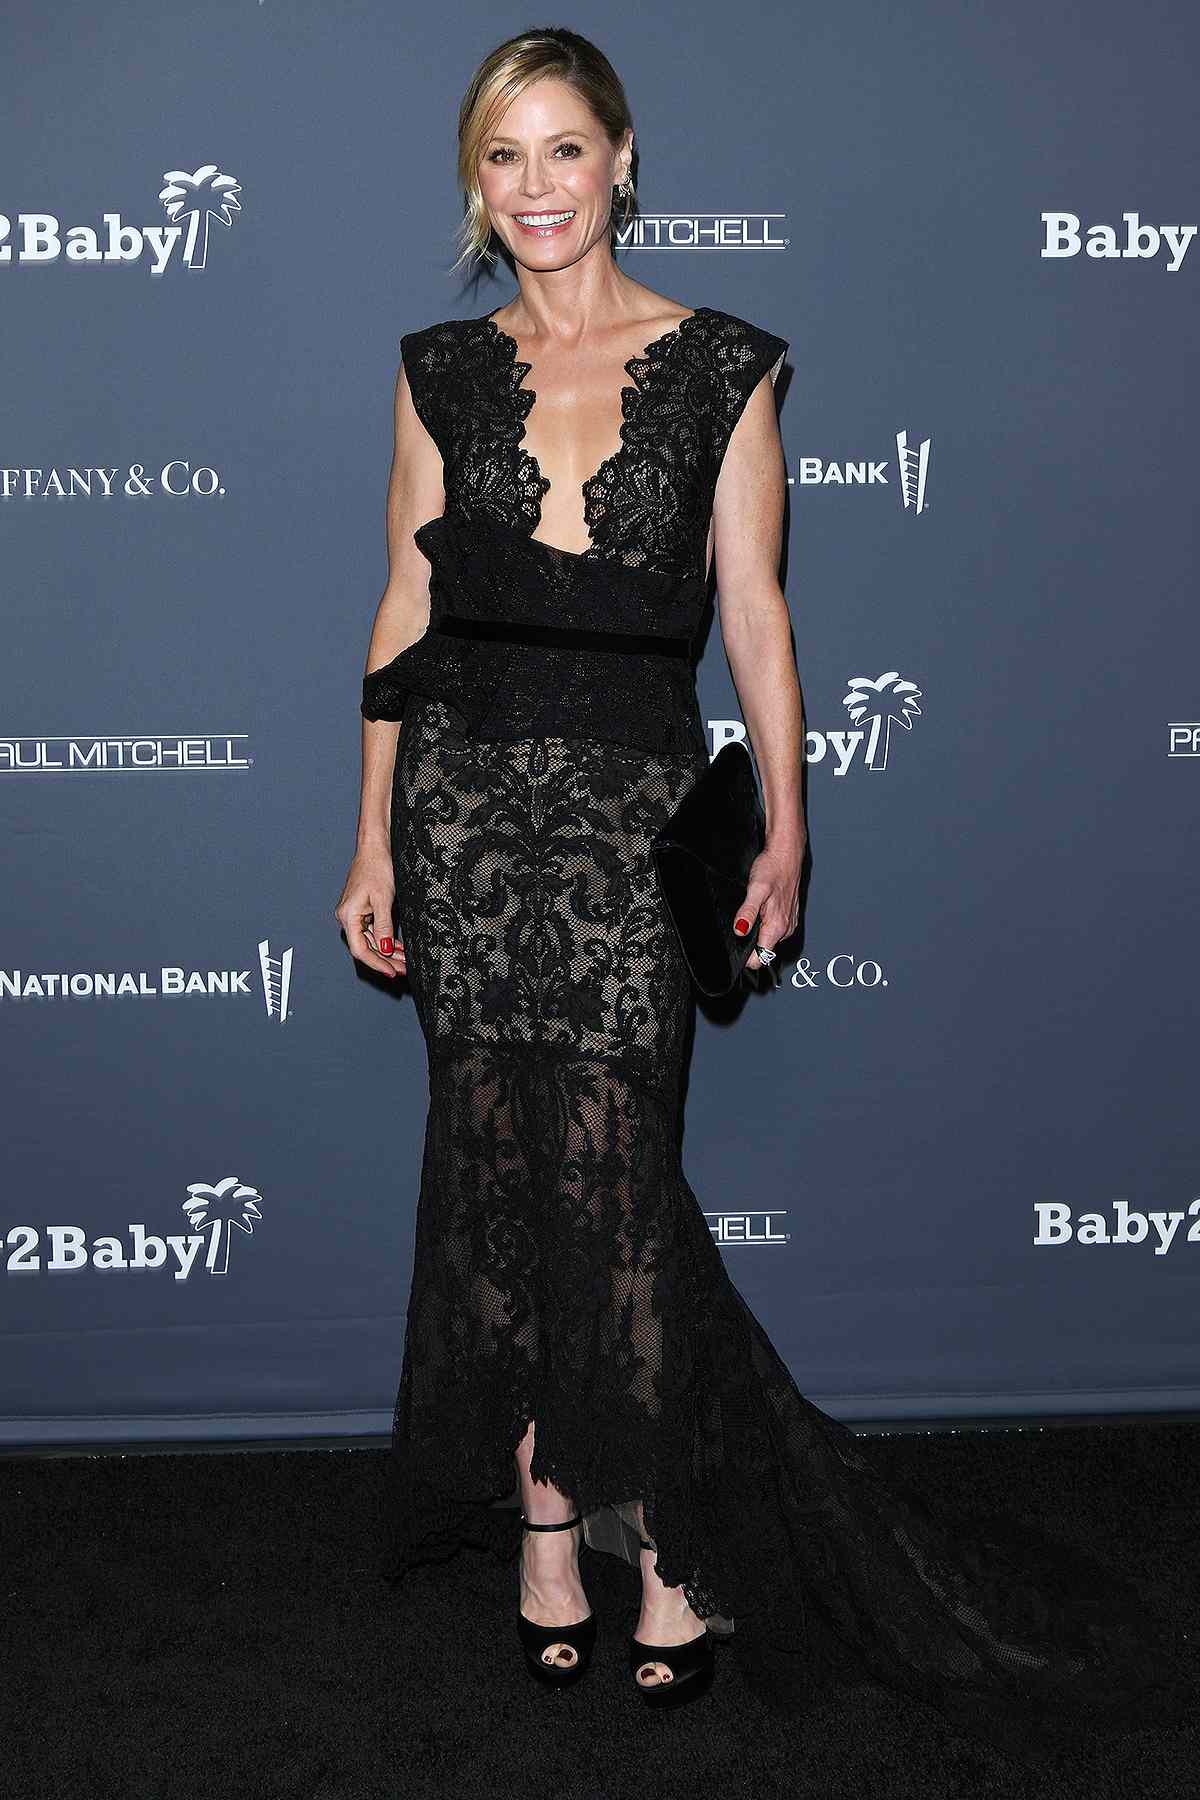 Baby2Baby 10-Year Gala Presented By Paul Mitchell - Arrivals